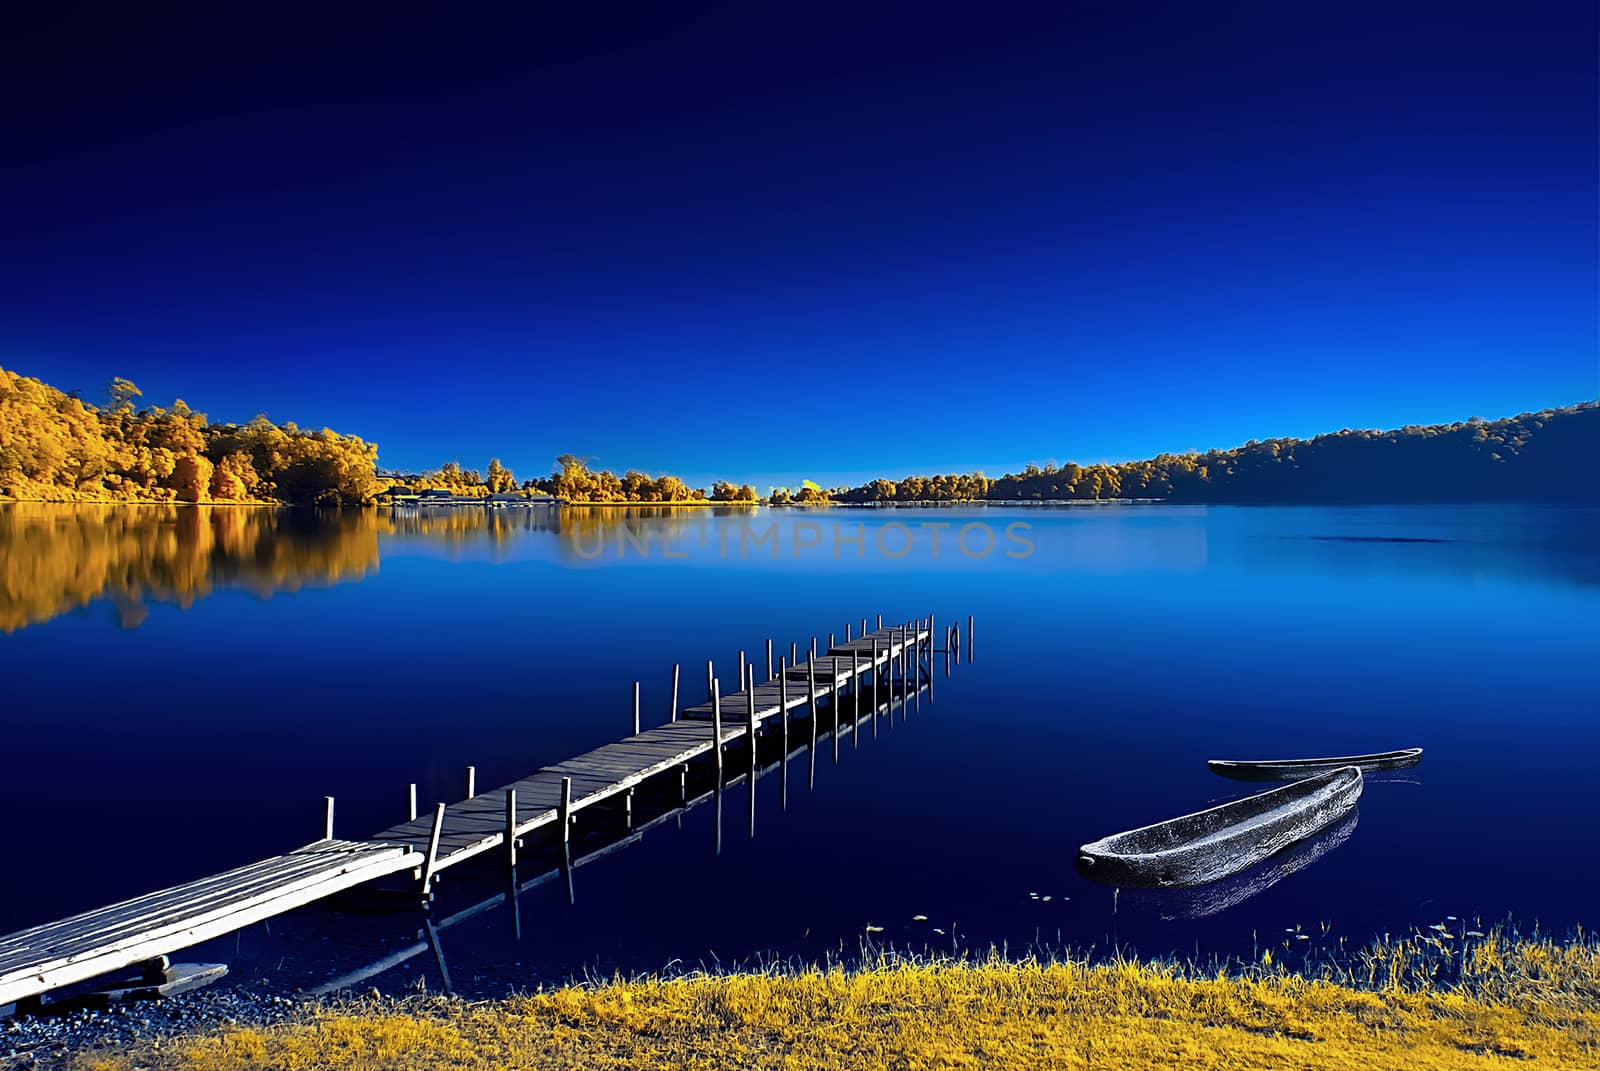 An infrared image of traditional wooden dock and a wooden boat beside and show its beautiful reflection from the water.